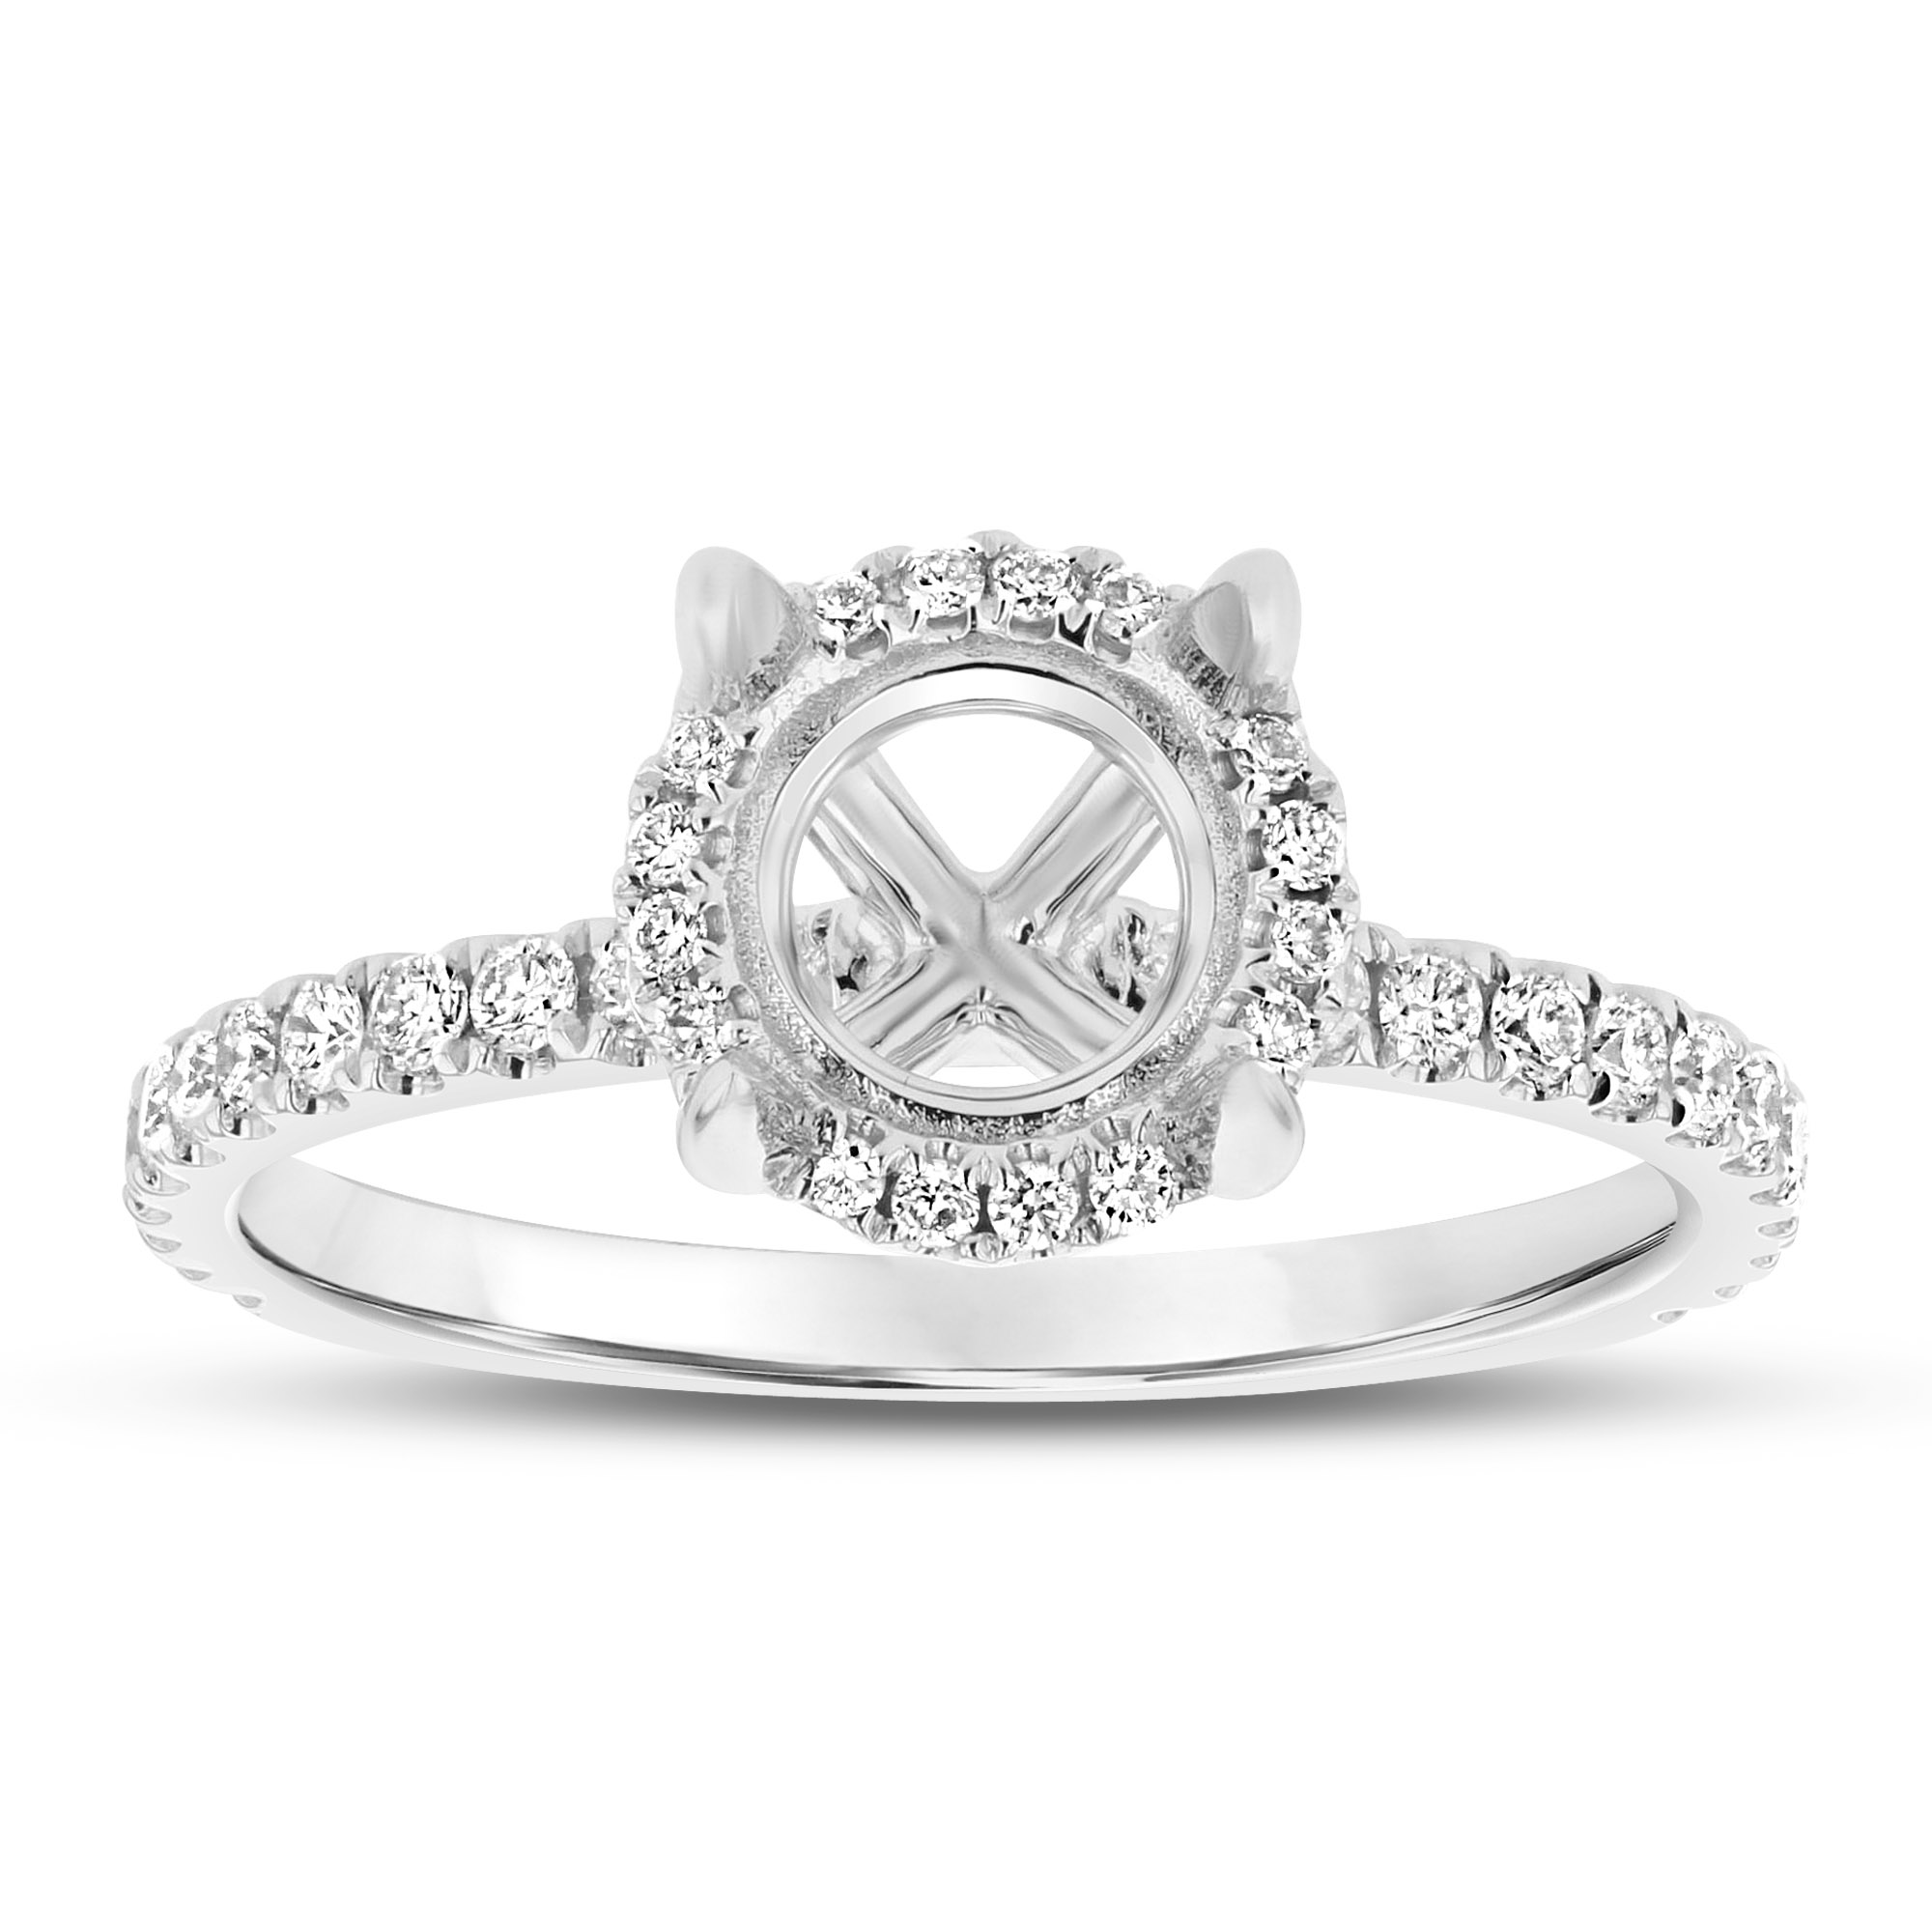 View 0.41ctw Diamond Halo Semi Mount Engagement Ring in 18k White Gold